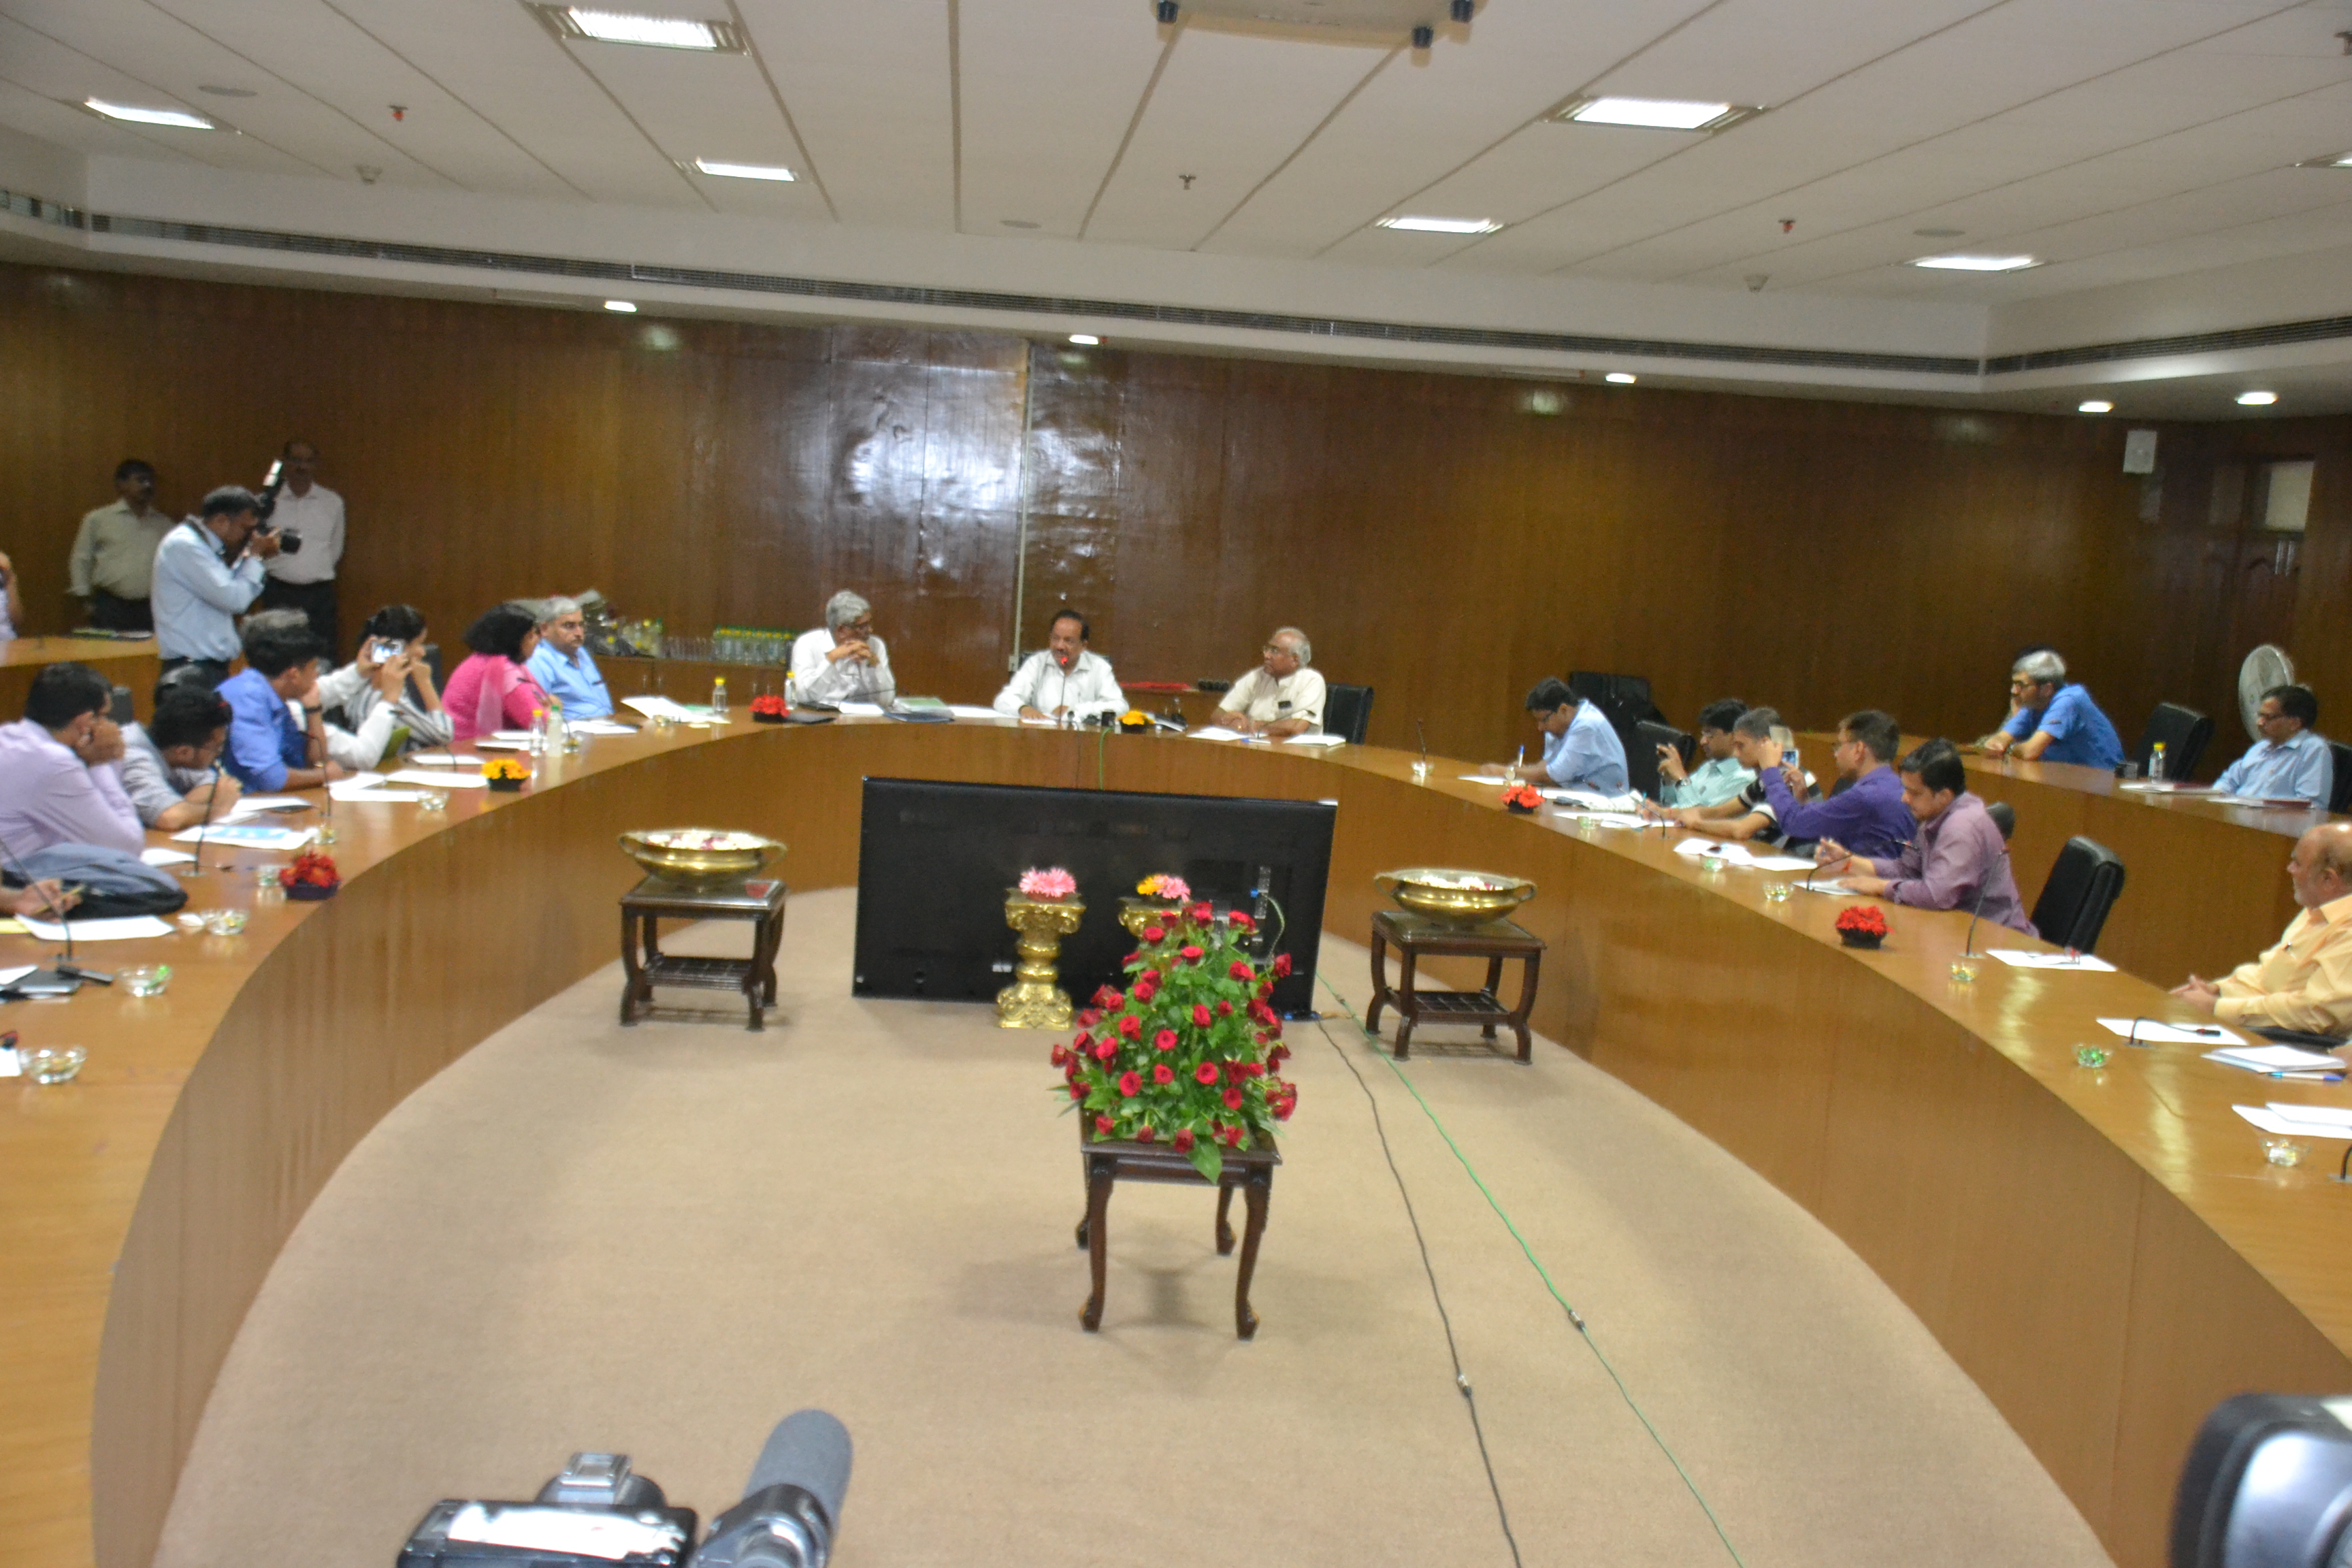 Dr. Harsh Vardhan Chairs Brainstorming Session